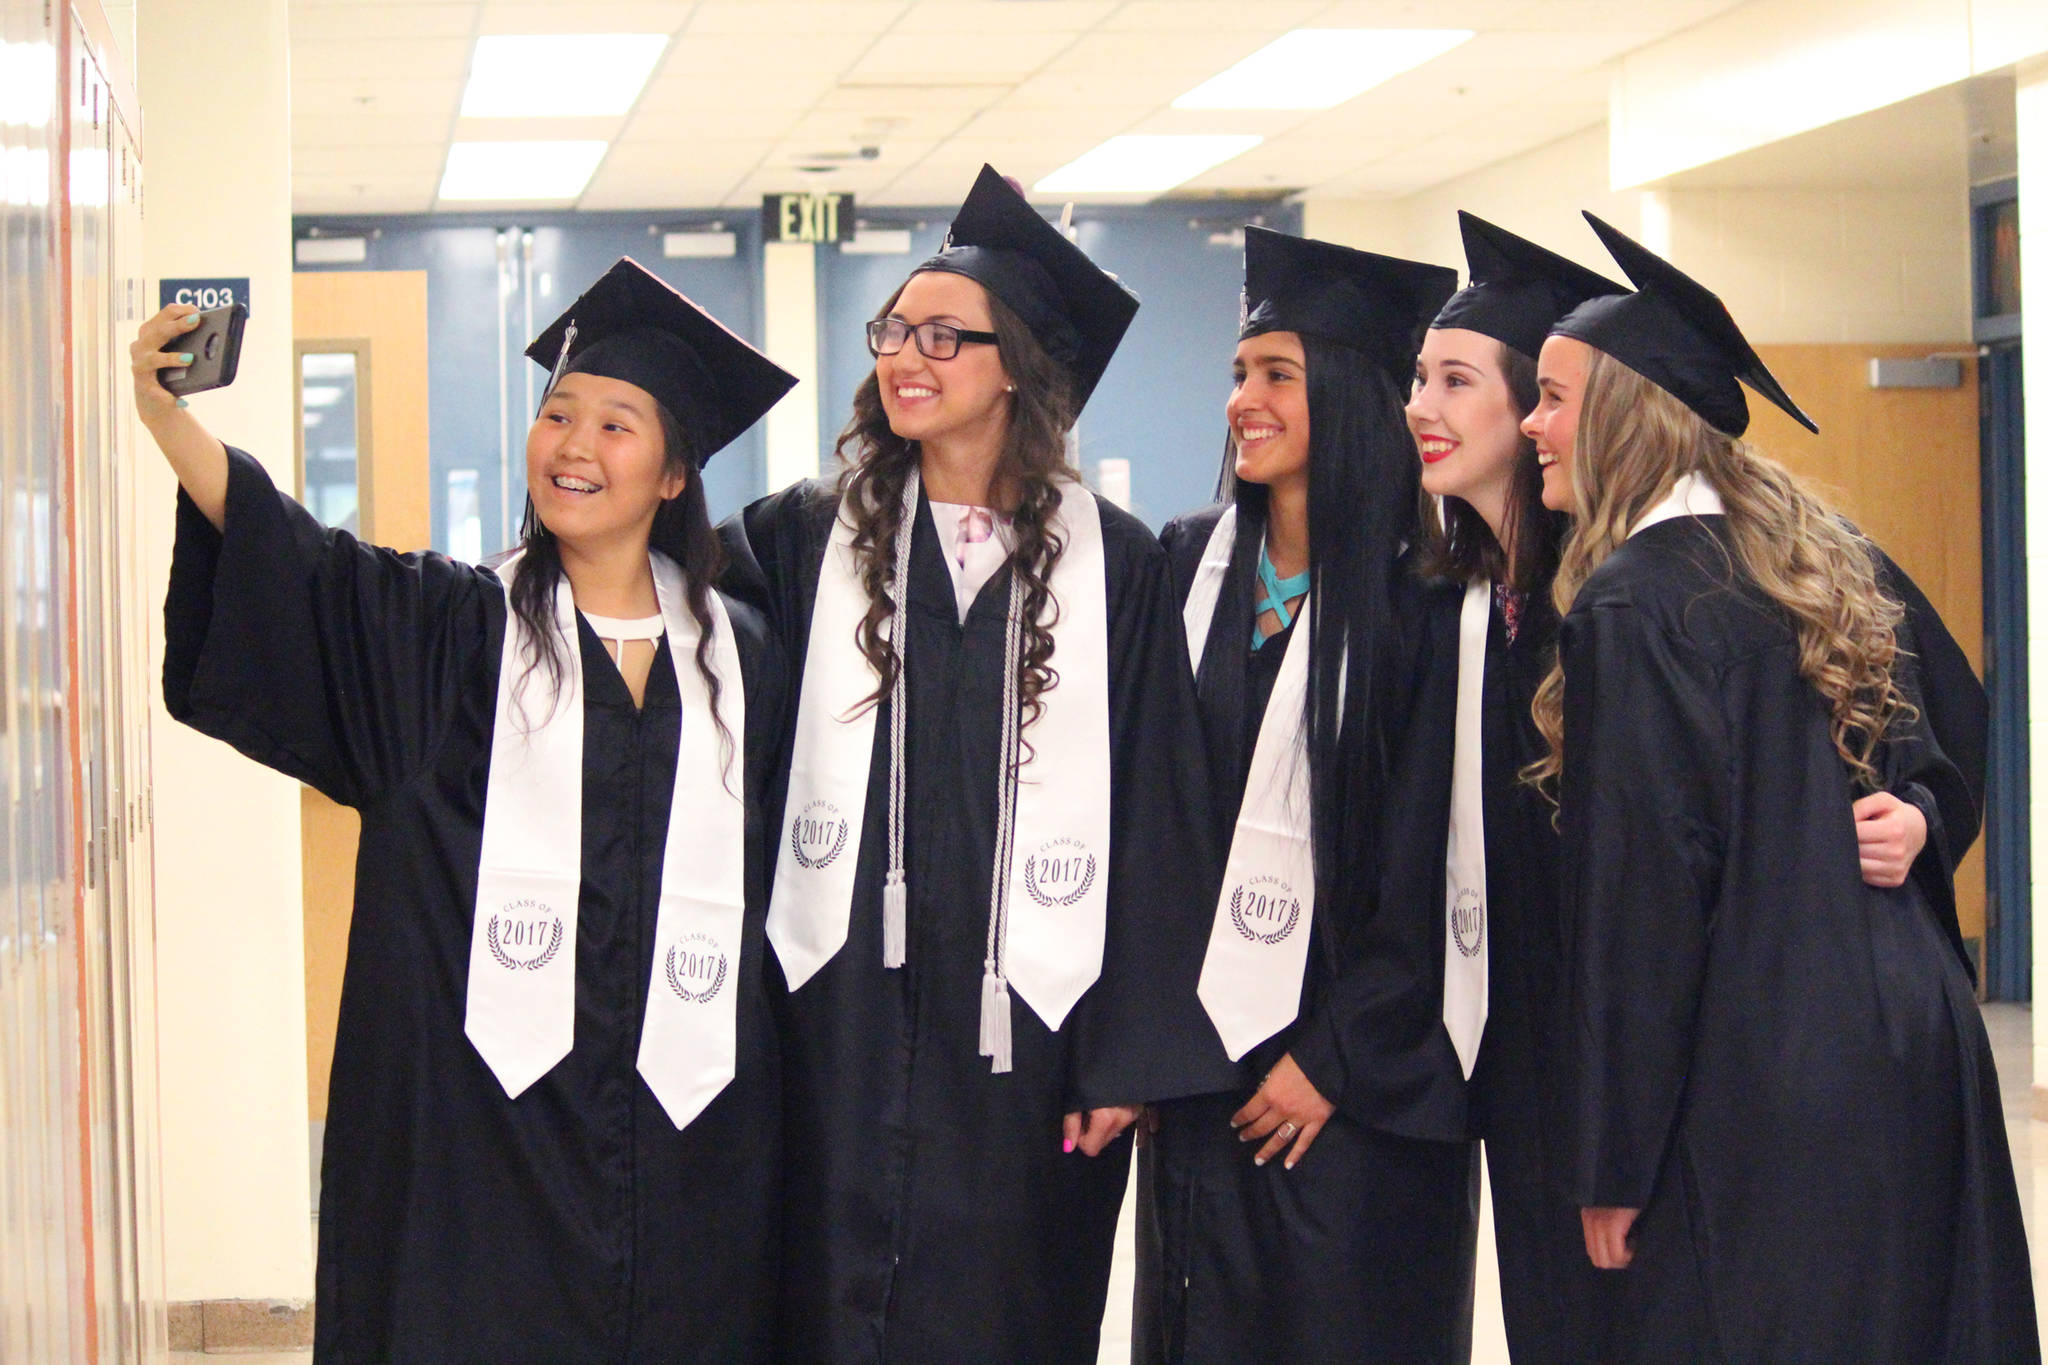 From left to right: Desmeranda Napoka, Ayla Pitt, Brianna Vollertsen, Madison Williams and Sofie Nielsen pose for a quick picture before walking in their graduation ceremony Tuesday, May 23, 2017 at Nikiski Middle-High School in Nikiski, Alaska. (Megan Pacer/Peninsula Clarion)